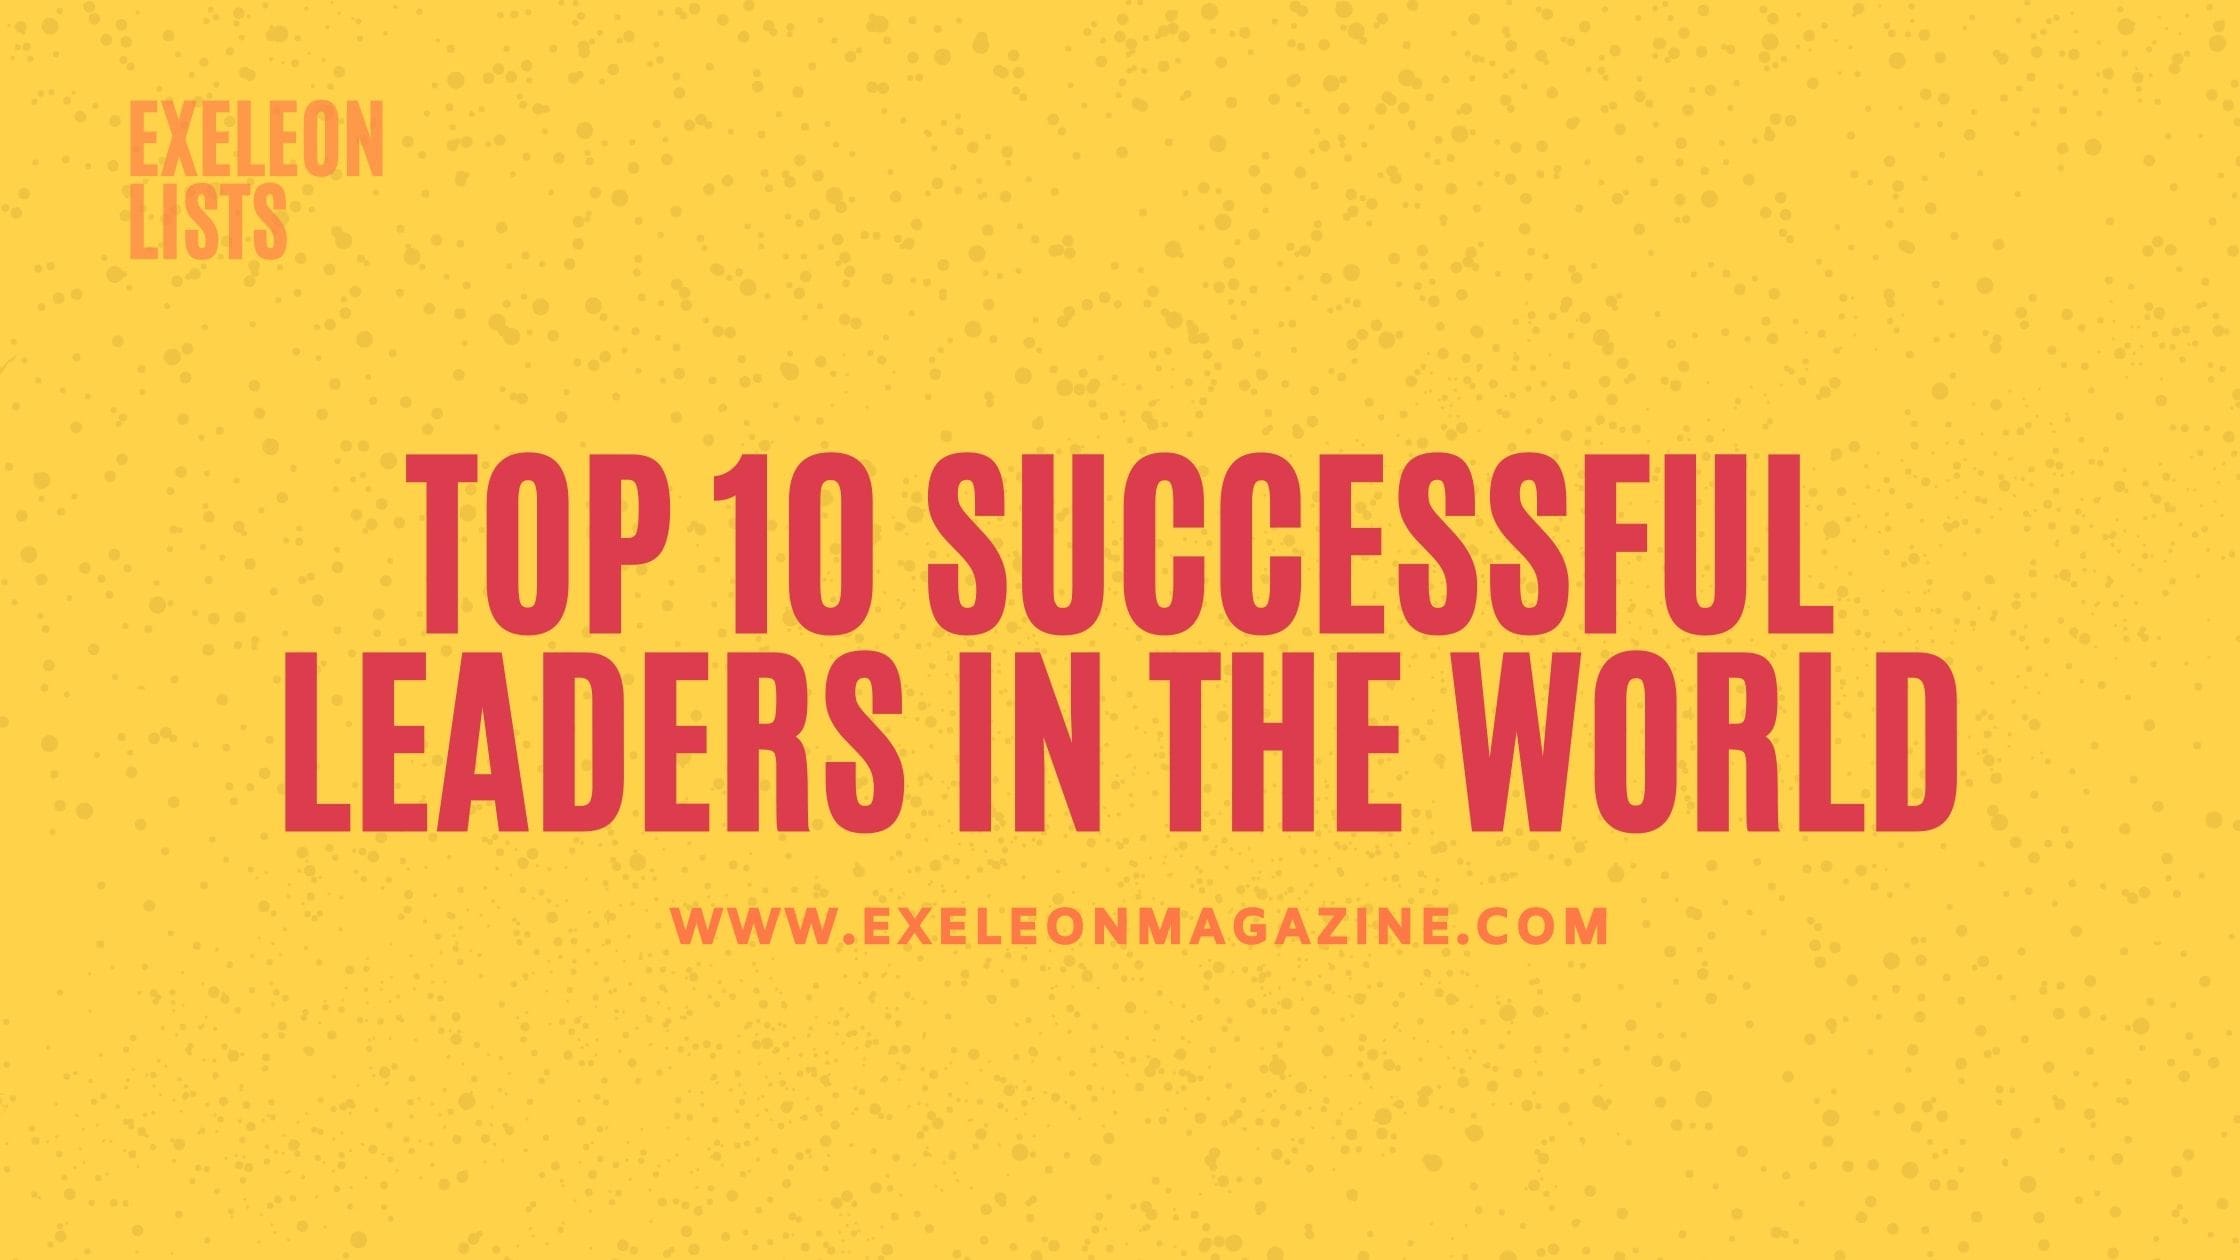 Top 10 Successful Leaders in the World